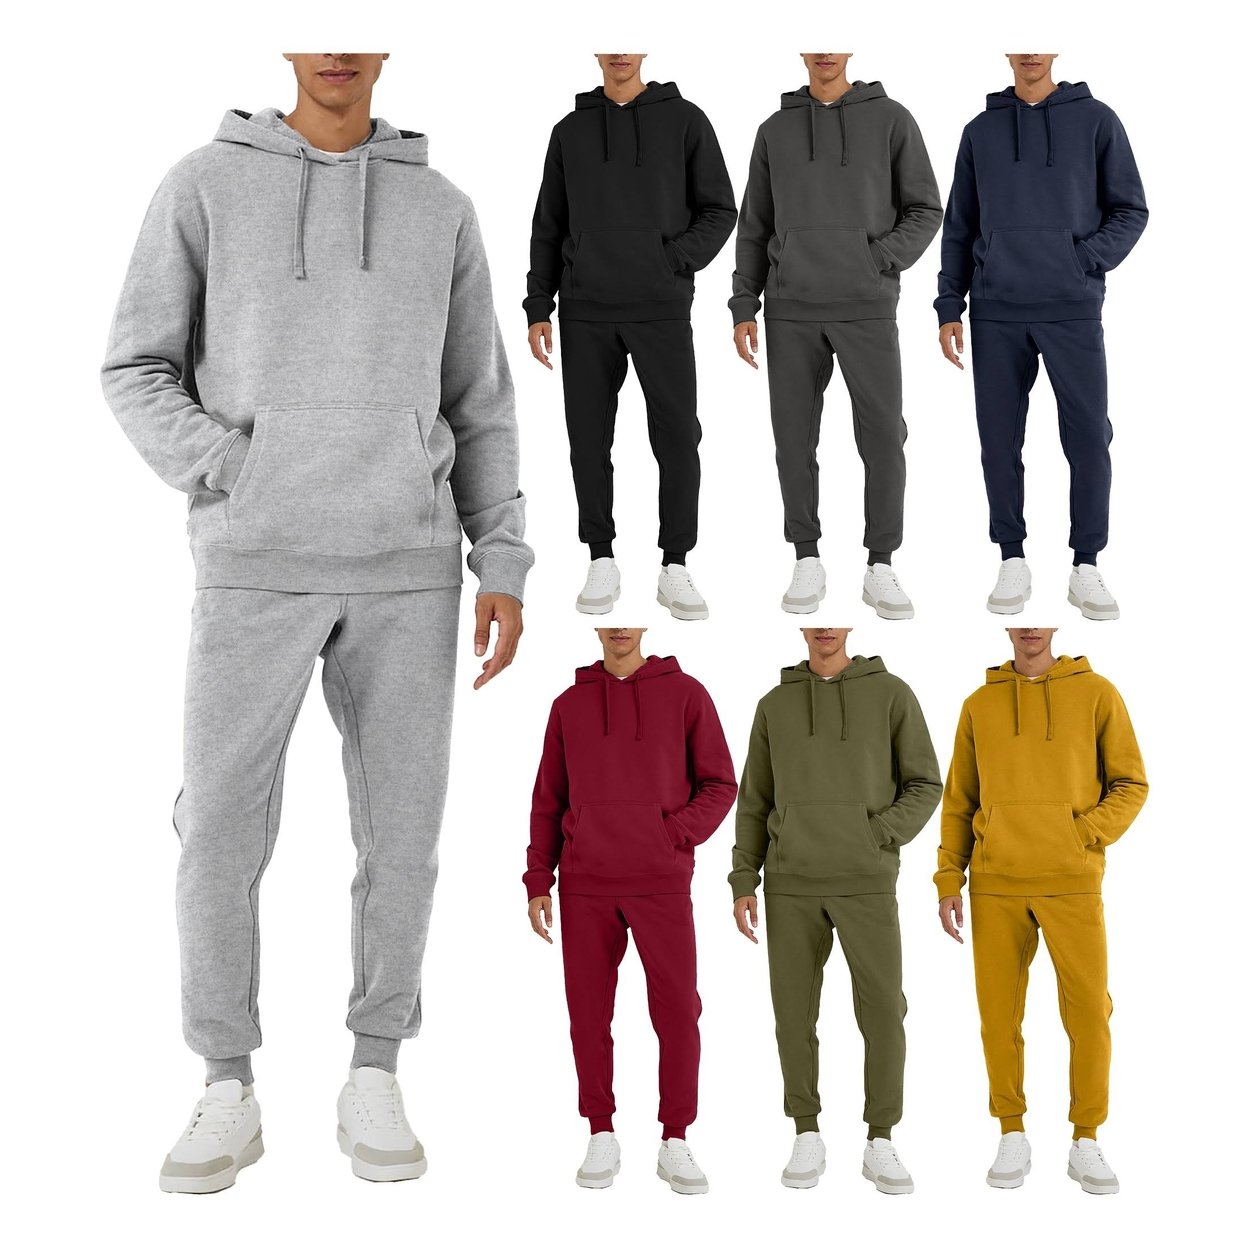 Multi-Pack: Men's Big & Tall Athletic Active Jogging Winter Warm Fleece Lined Pullover Tracksuit Set - Grey, 1-pack, Large